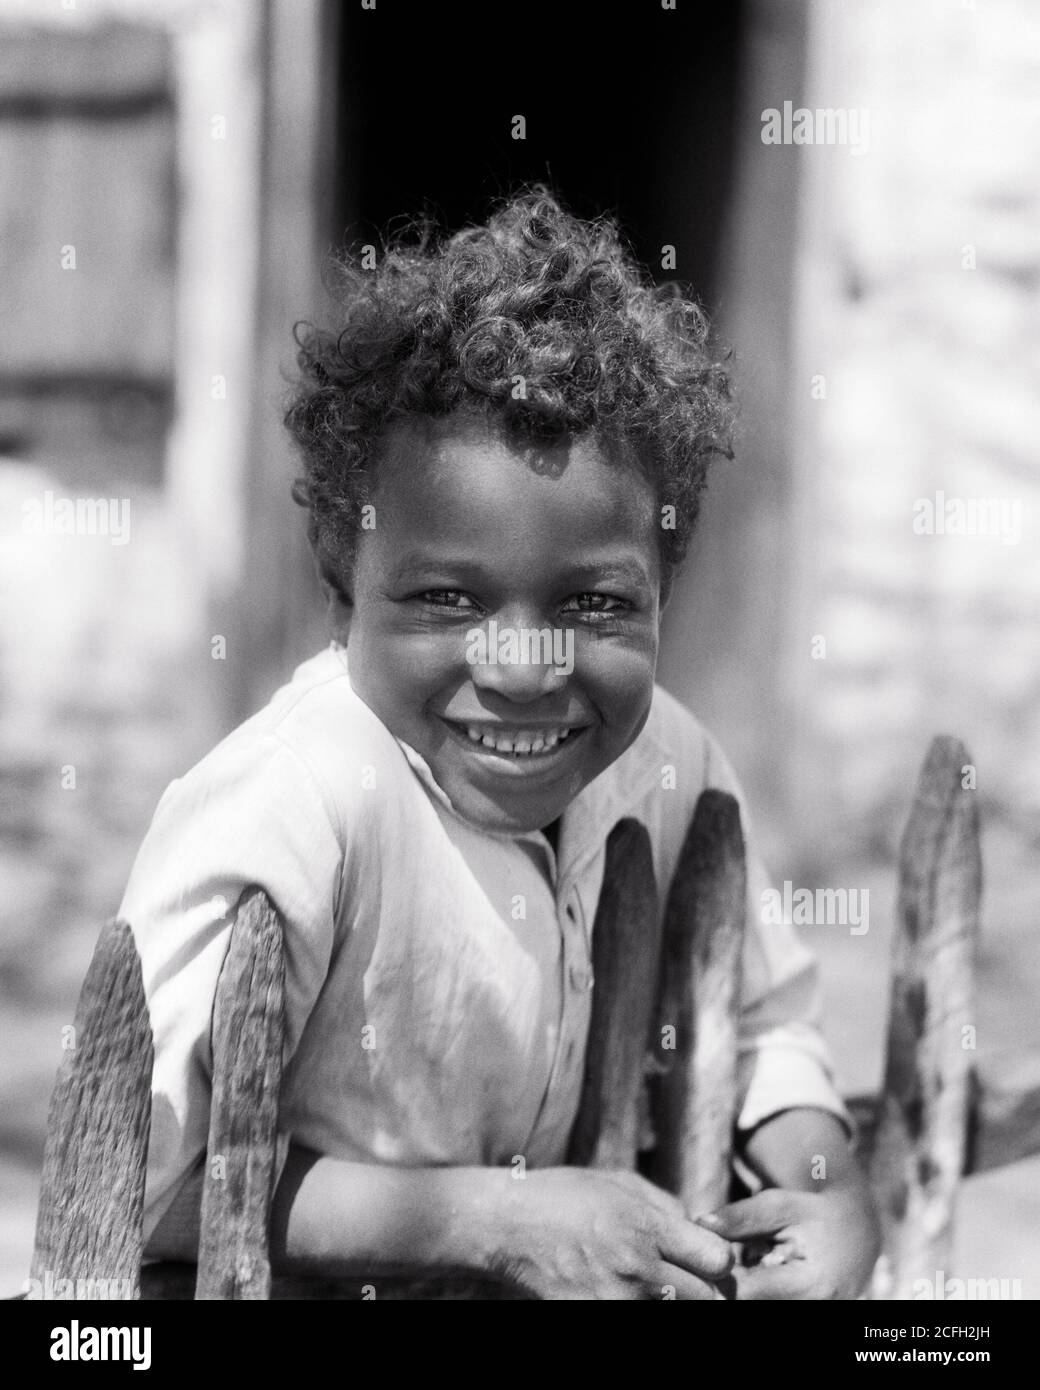 1930s SMILING DEPRESSION ERA CURLY HAIR AFRICAN-AMERICAN BOY LOOKING AT CAMERA LEANING ON WOOD PICKET FENCE IN FRONT OF HOME - n966 HAR001 HARS LIFESTYLE POOR RURAL HOME LIFE COPY SPACE HALF-LENGTH MALES CONFIDENCE EXPRESSIONS B&W EYE CONTACT HAPPINESS CHEERFUL STRENGTH AFRICAN-AMERICANS AFRICAN-AMERICAN BLACK ETHNICITY CURLY PRIDE IN OF ON SMILES CONCEPTUAL JOYFUL DISADVANTAGED GROWTH JUVENILES BLACK AND WHITE ERA HAR001 OLD FASHIONED AFRICAN AMERICANS Stock Photo